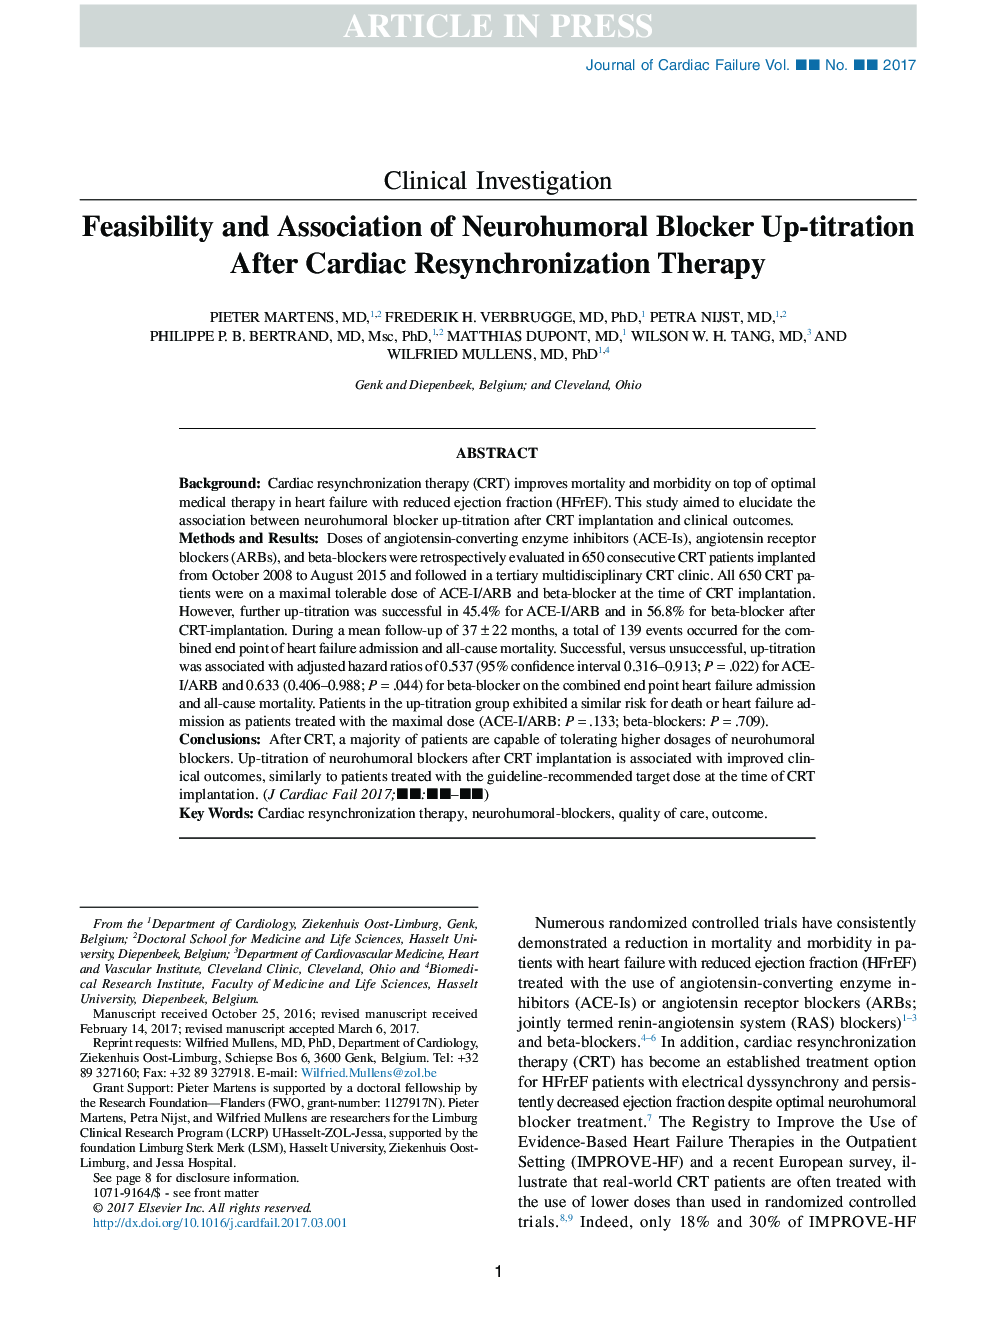 Feasibility and Association of Neurohumoral Blocker Up-titration After Cardiac Resynchronization Therapy